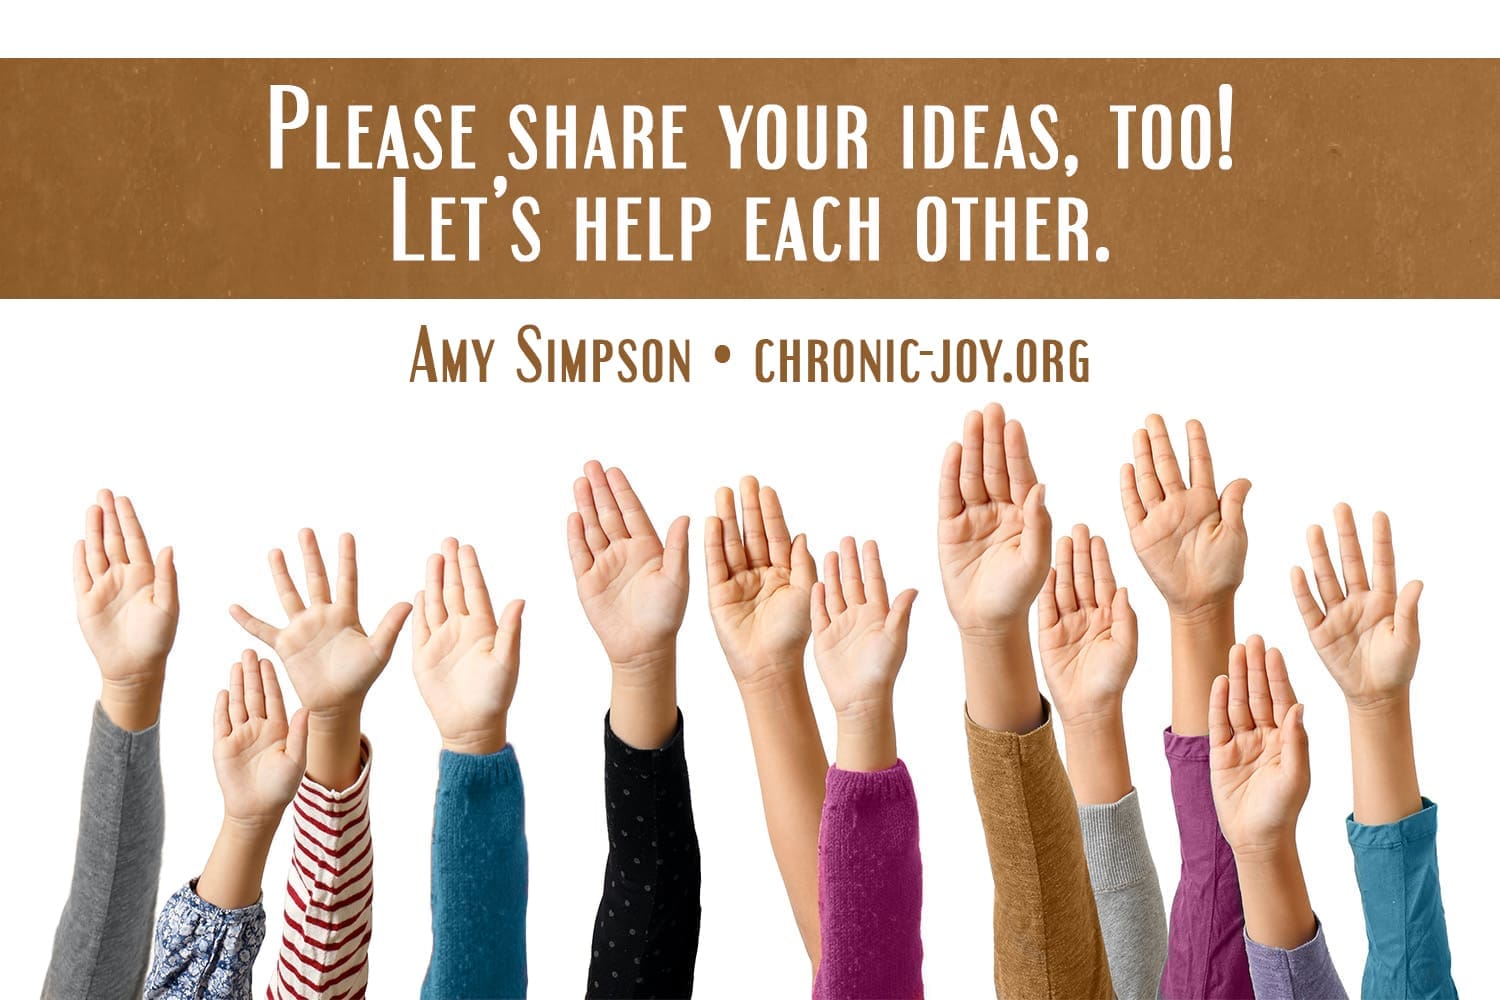 Share your ideas! Let's help each other!